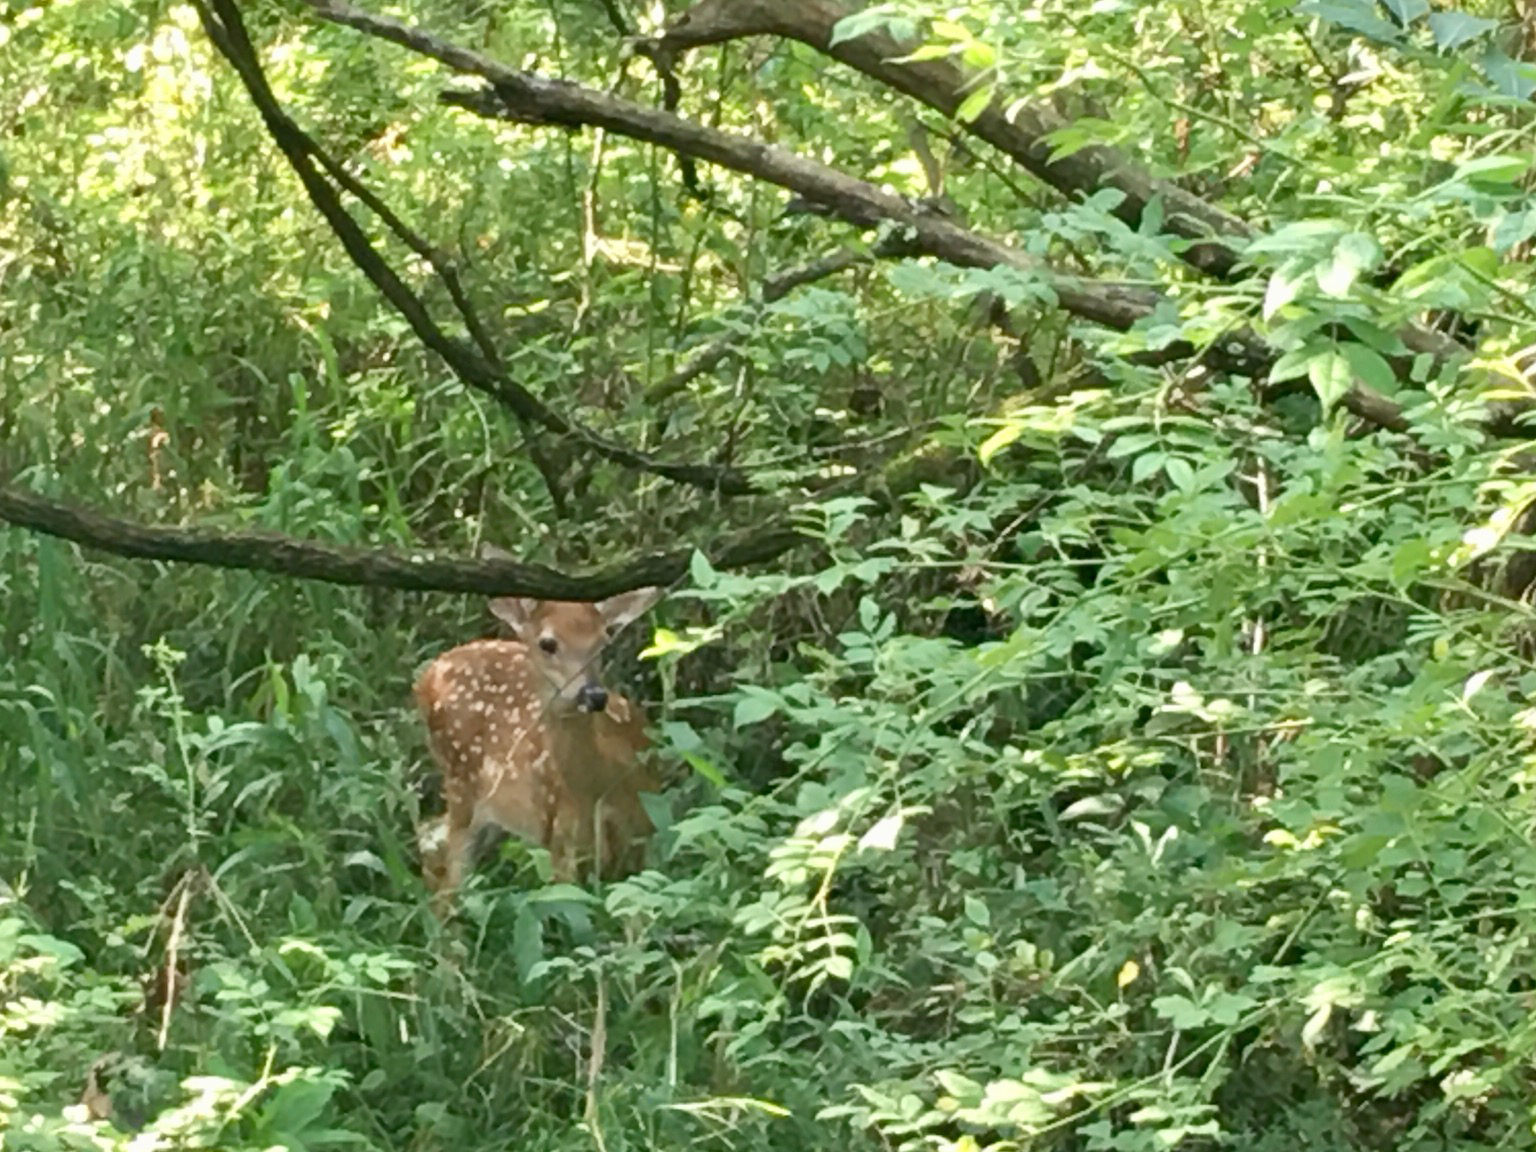 Fawn hiding out in the tall grass along the Sharp trail